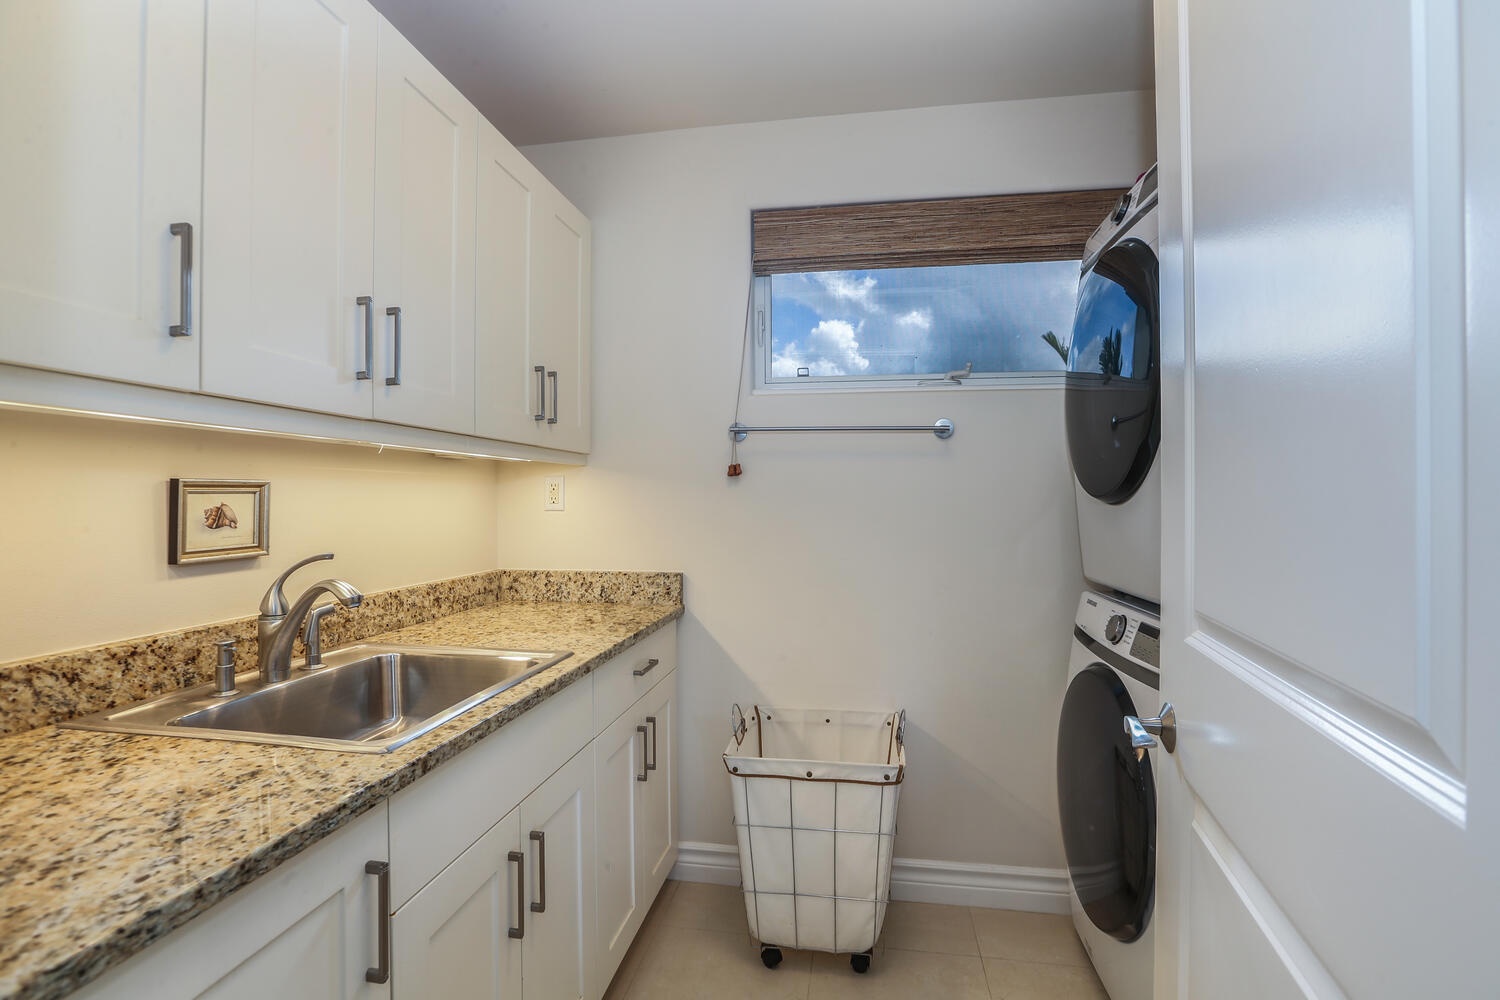 Princeville Vacation Rentals, Hale Moana - Laundry room with full size washer, dryer and sink